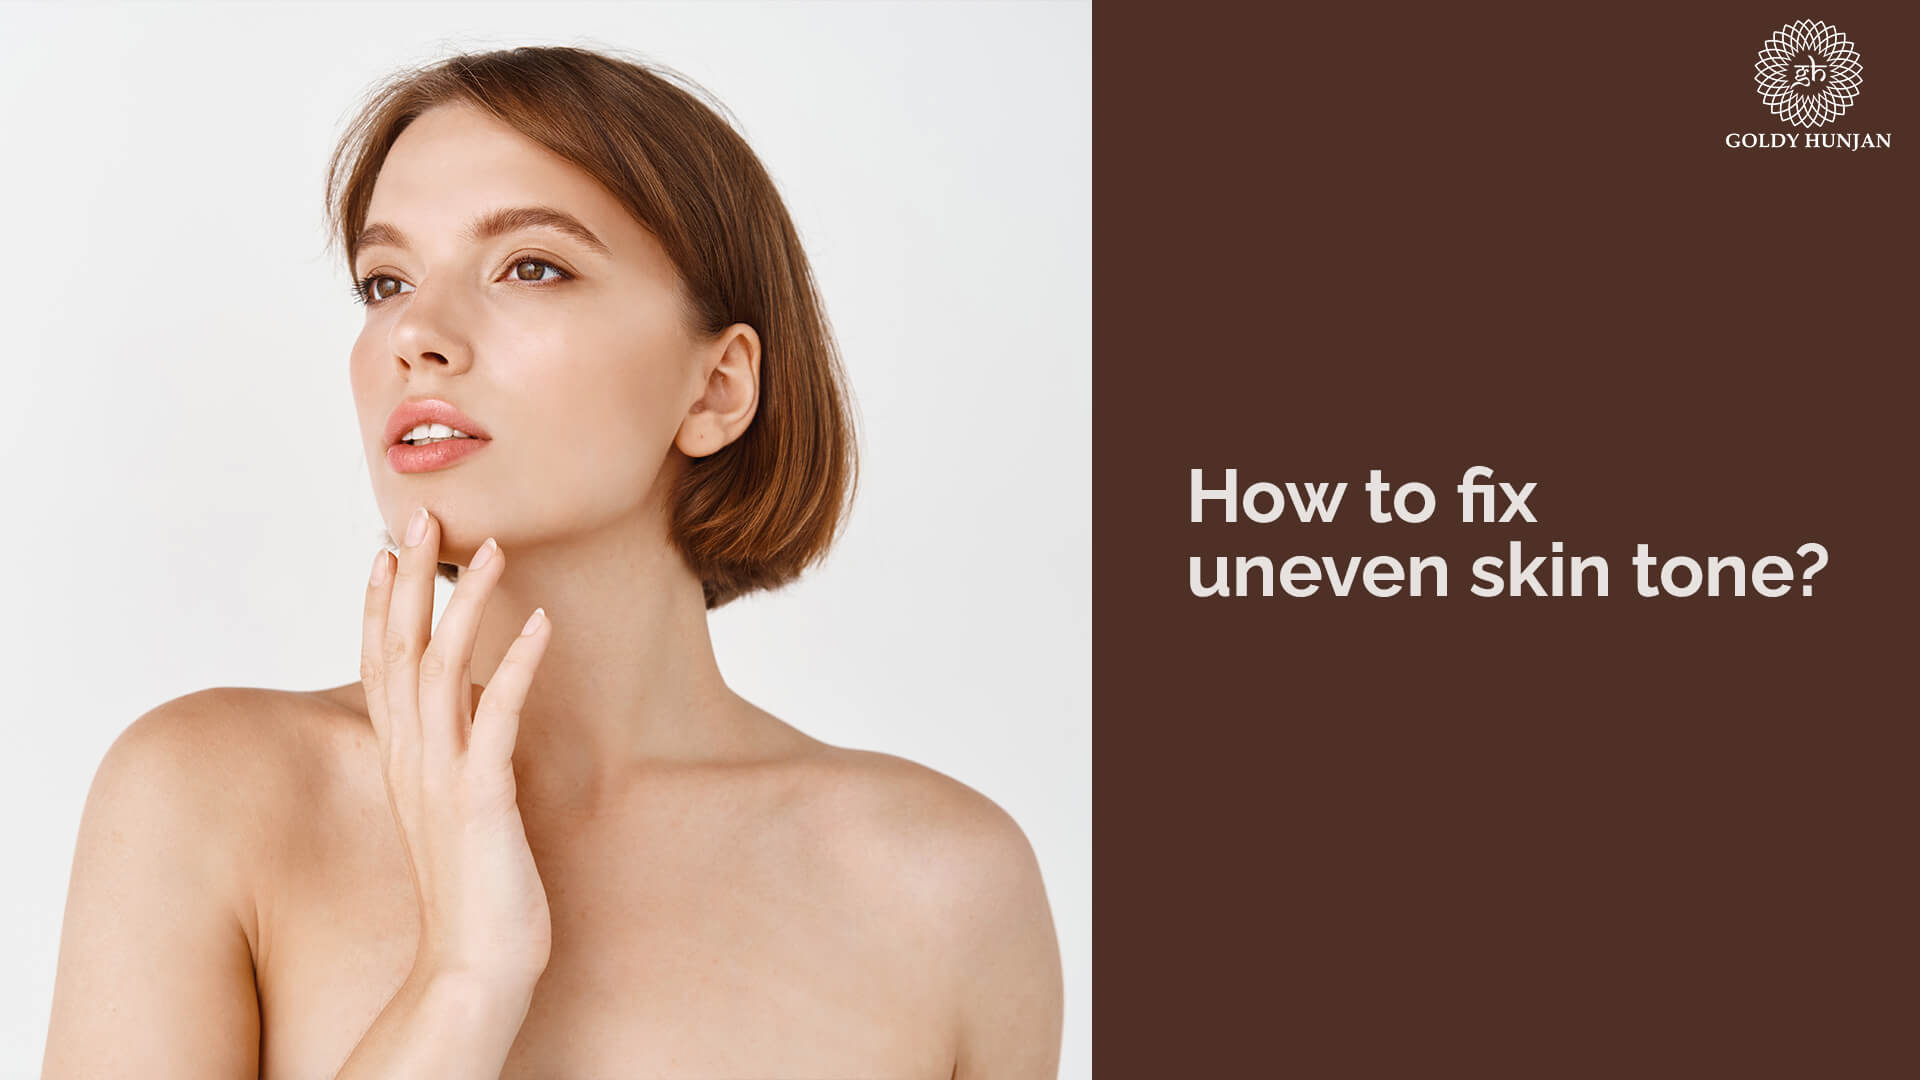 How to fix uneven skin tone